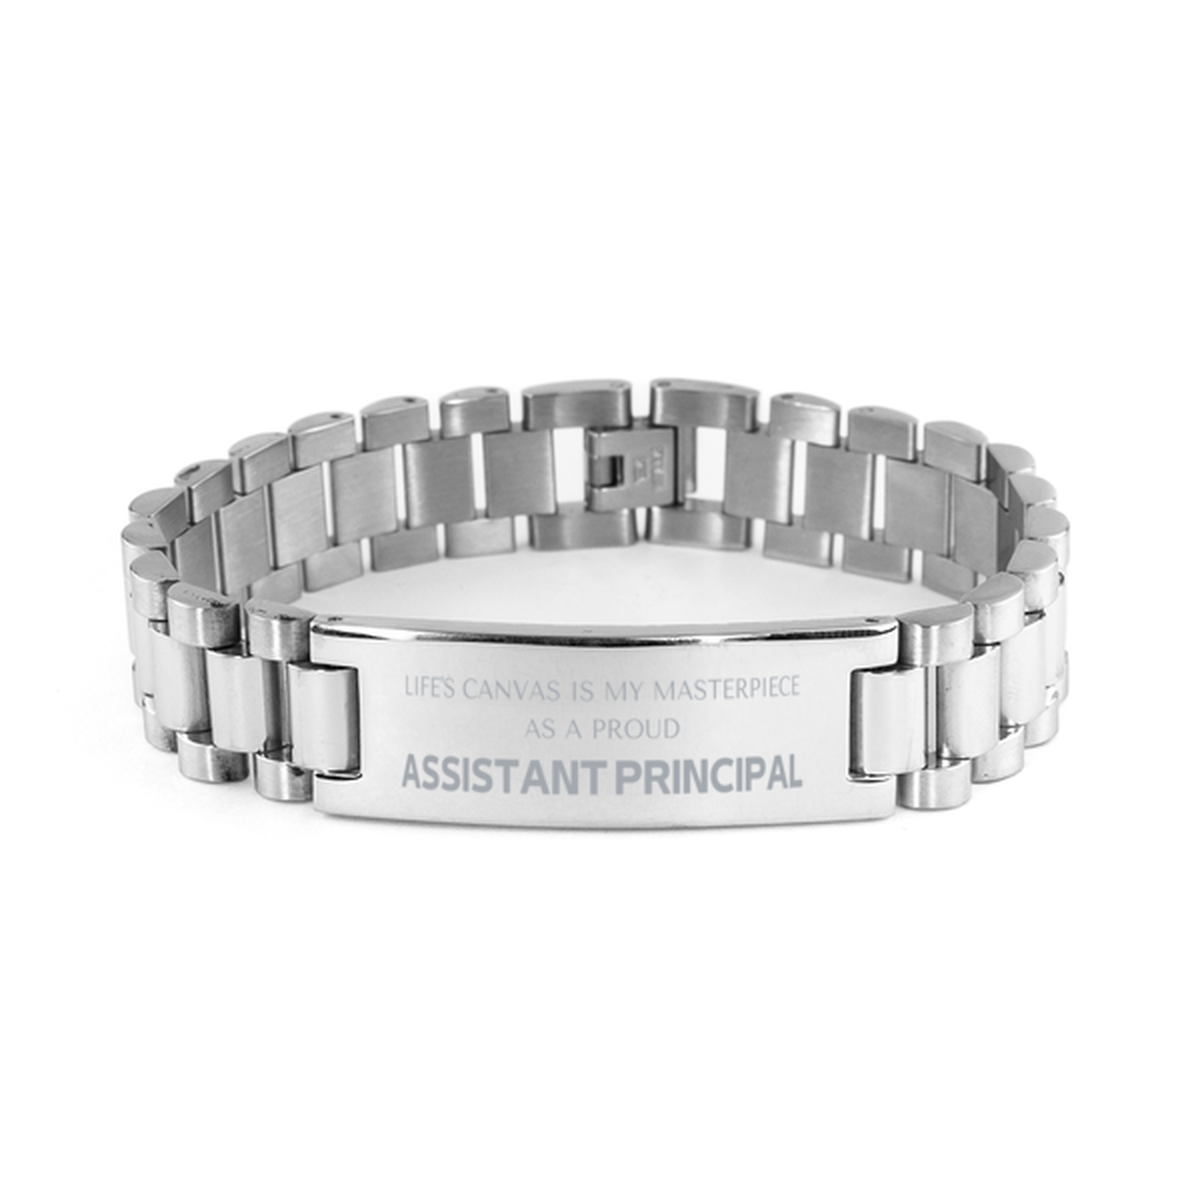 Proud Assistant Principal Gifts, Life's canvas is my masterpiece, Epic Birthday Christmas Unique Ladder Stainless Steel Bracelet For Assistant Principal, Coworkers, Men, Women, Friends